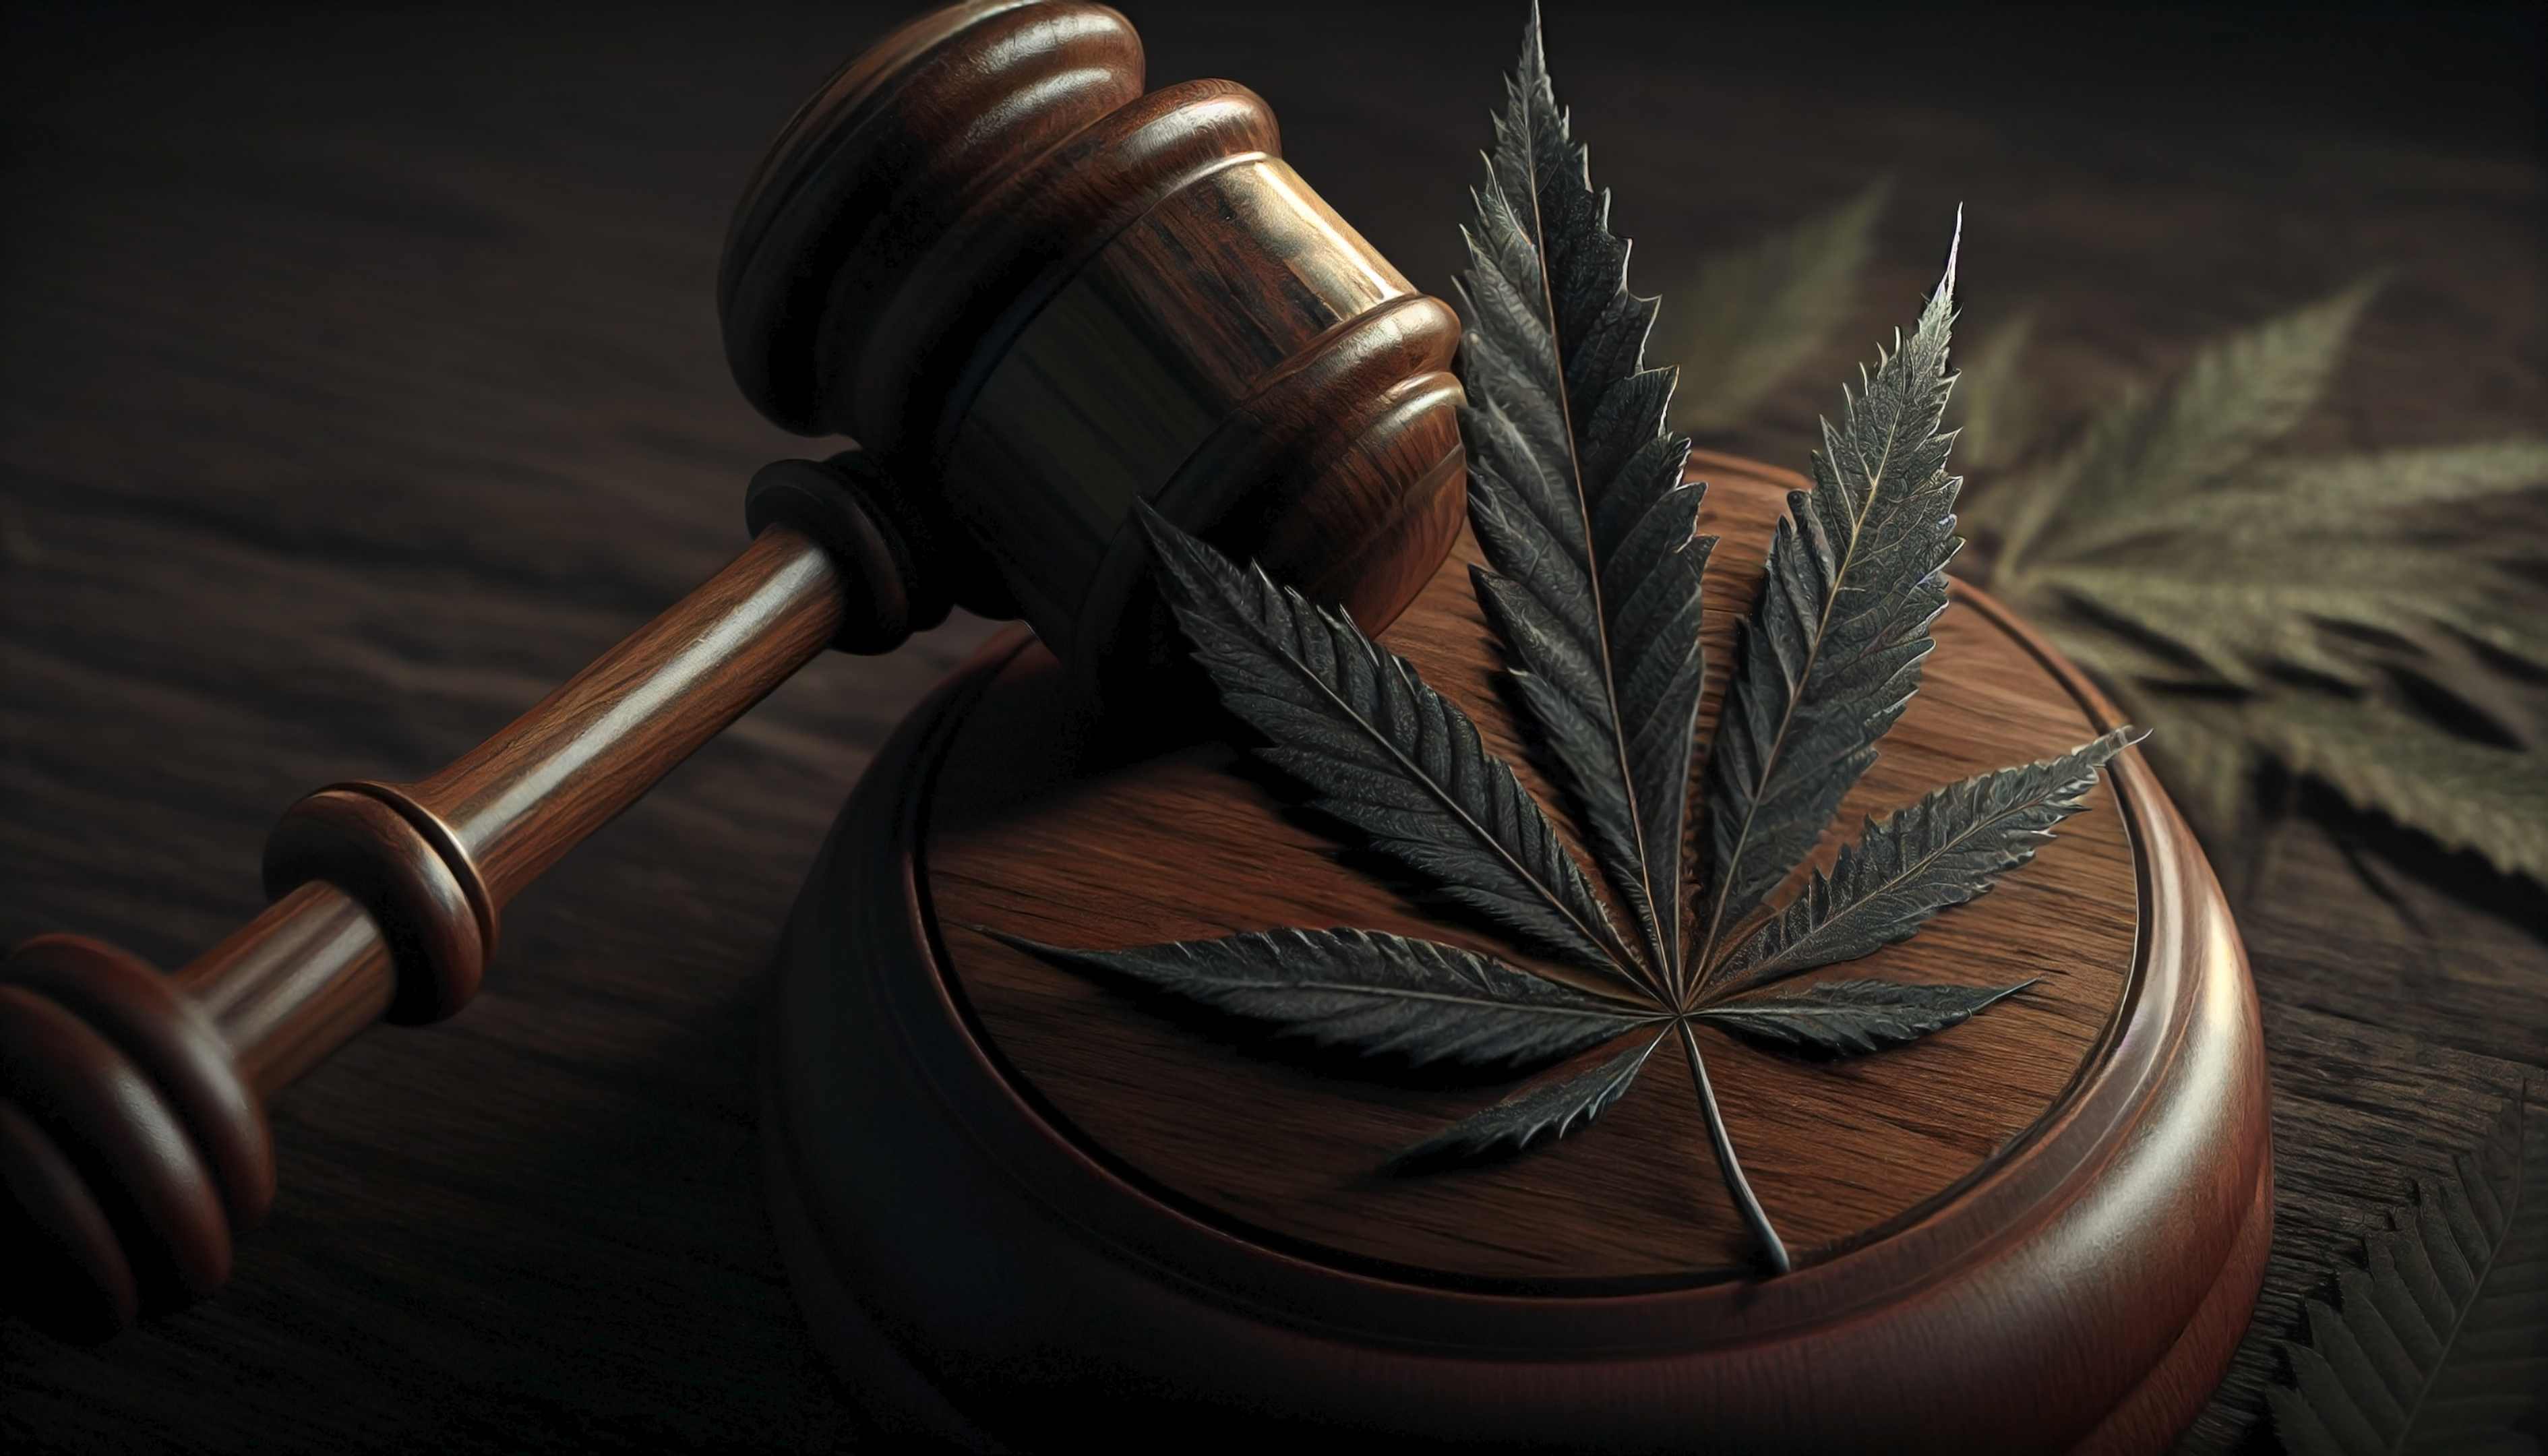 Within the lawsuit, it will be interesting to see how a judge rules on these hemp companies. Will it matter if they have prior offenses with similar accusations?